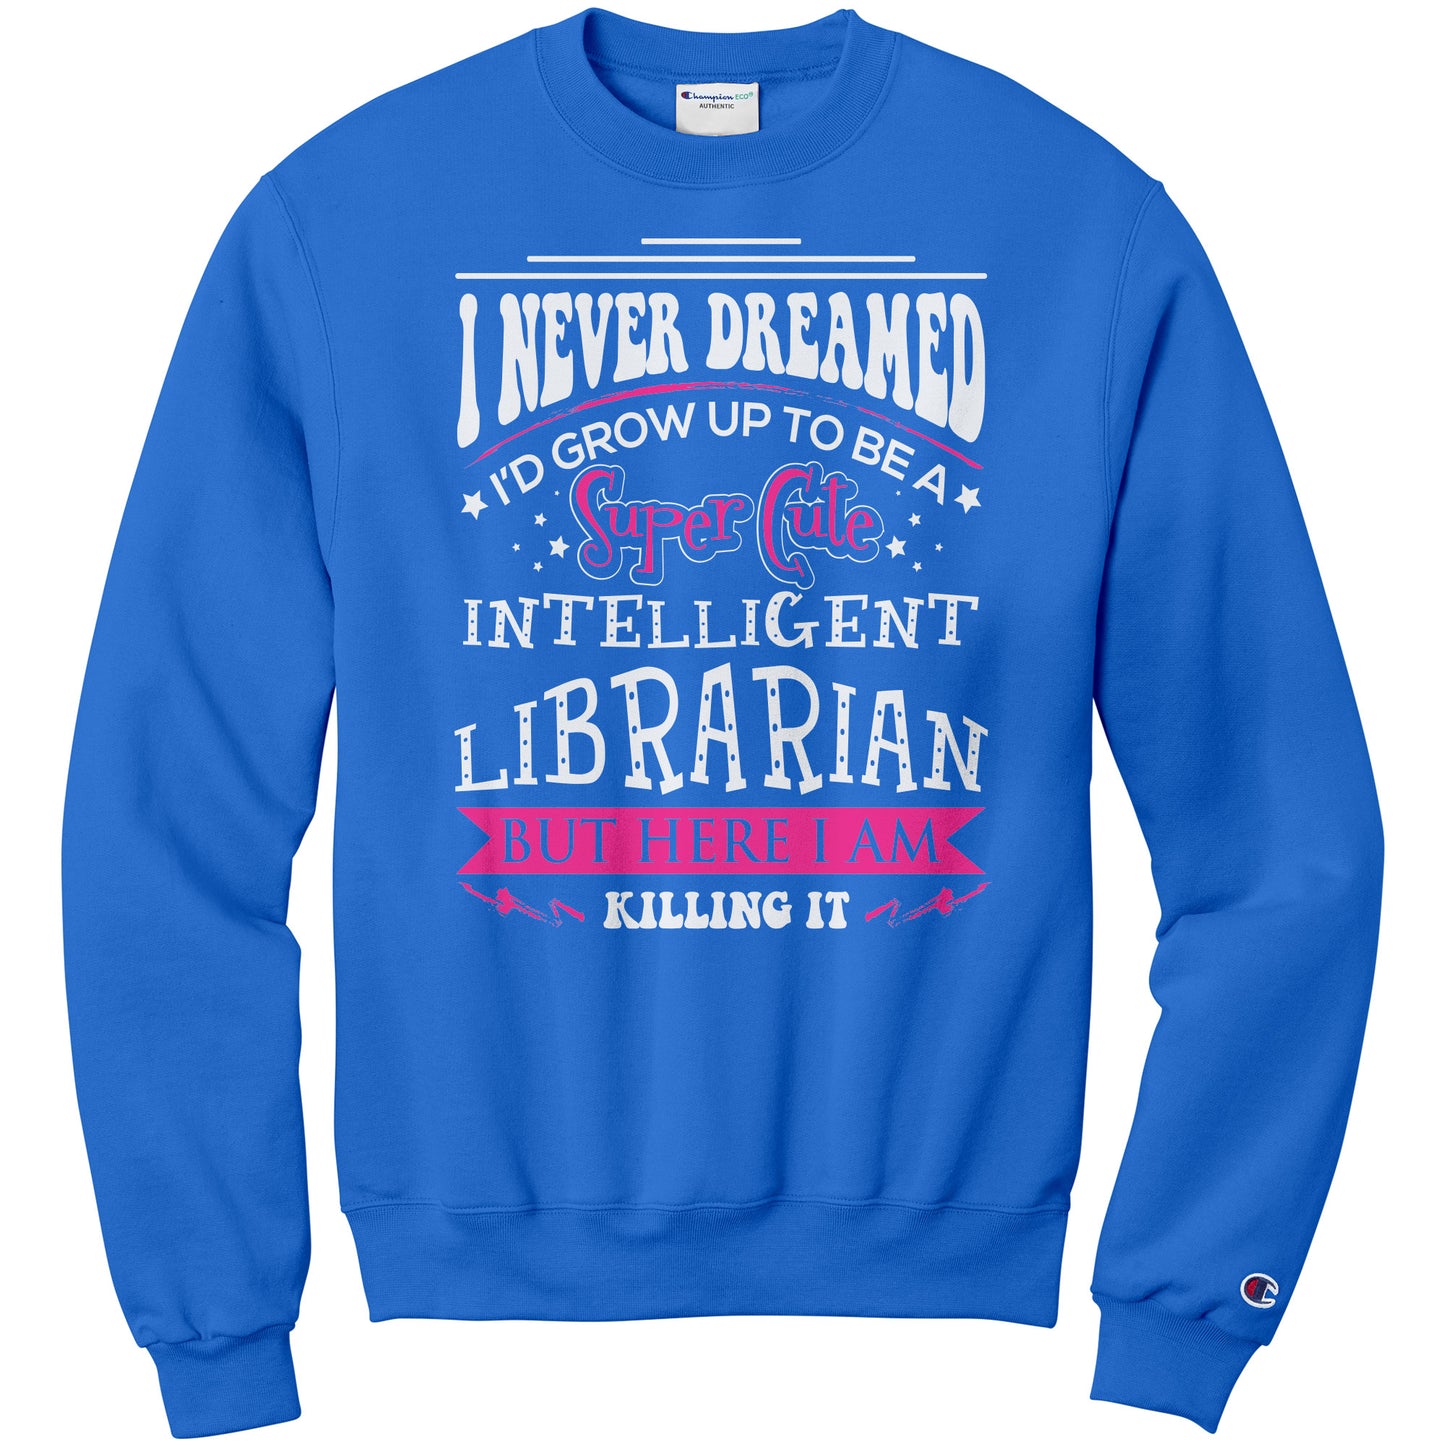 I Never Dreamed I'd Grow Up To Be A Super Cute Intelligent Librarian But Here I Am Killing It | Sweatshirt